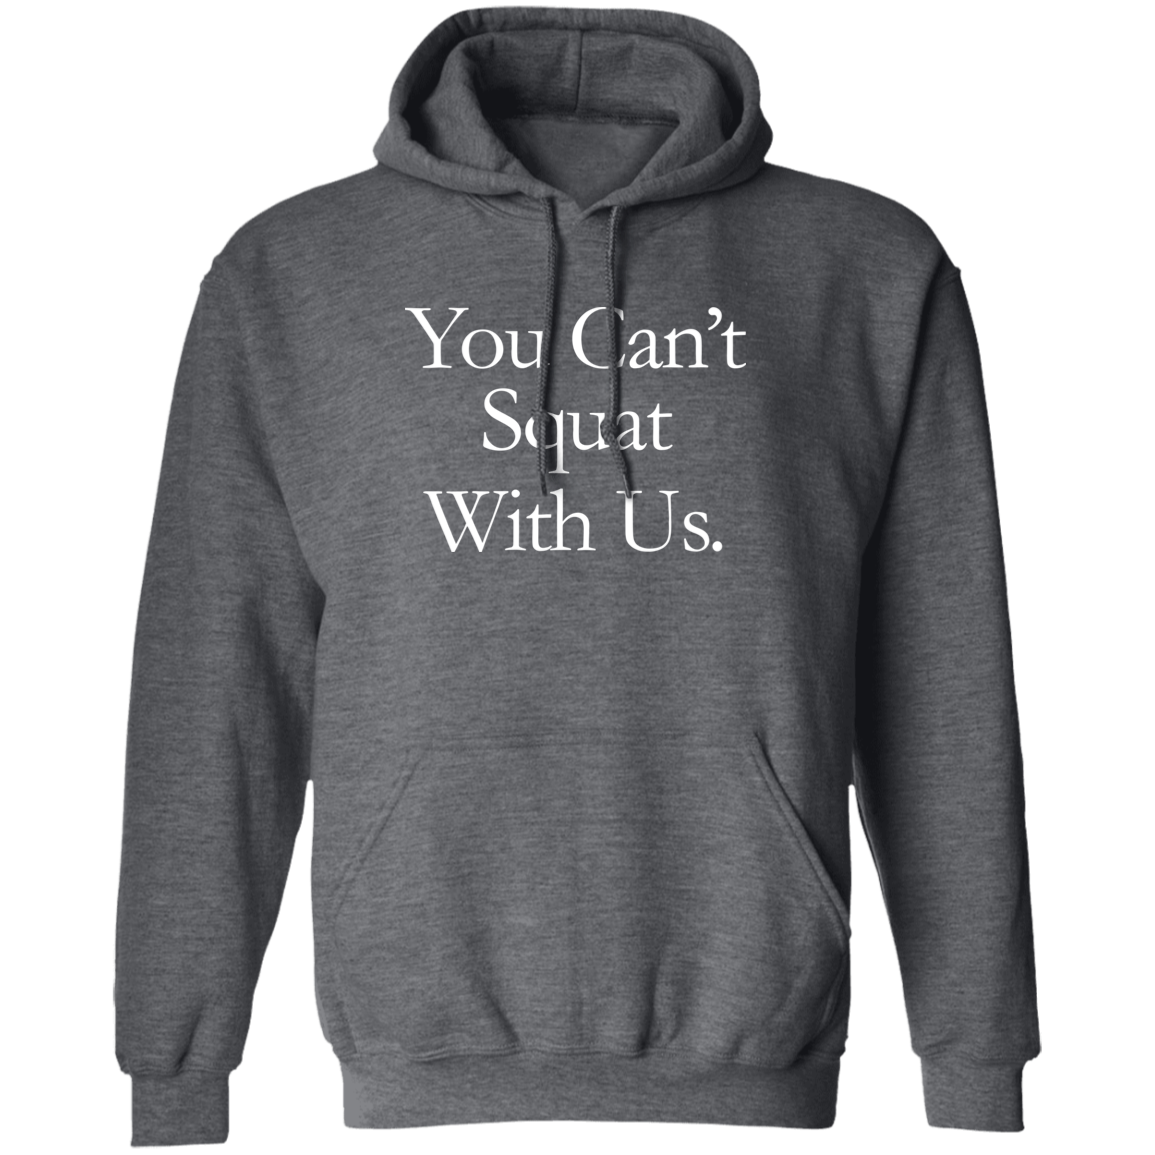 You Can't Squat With Us Hoodie